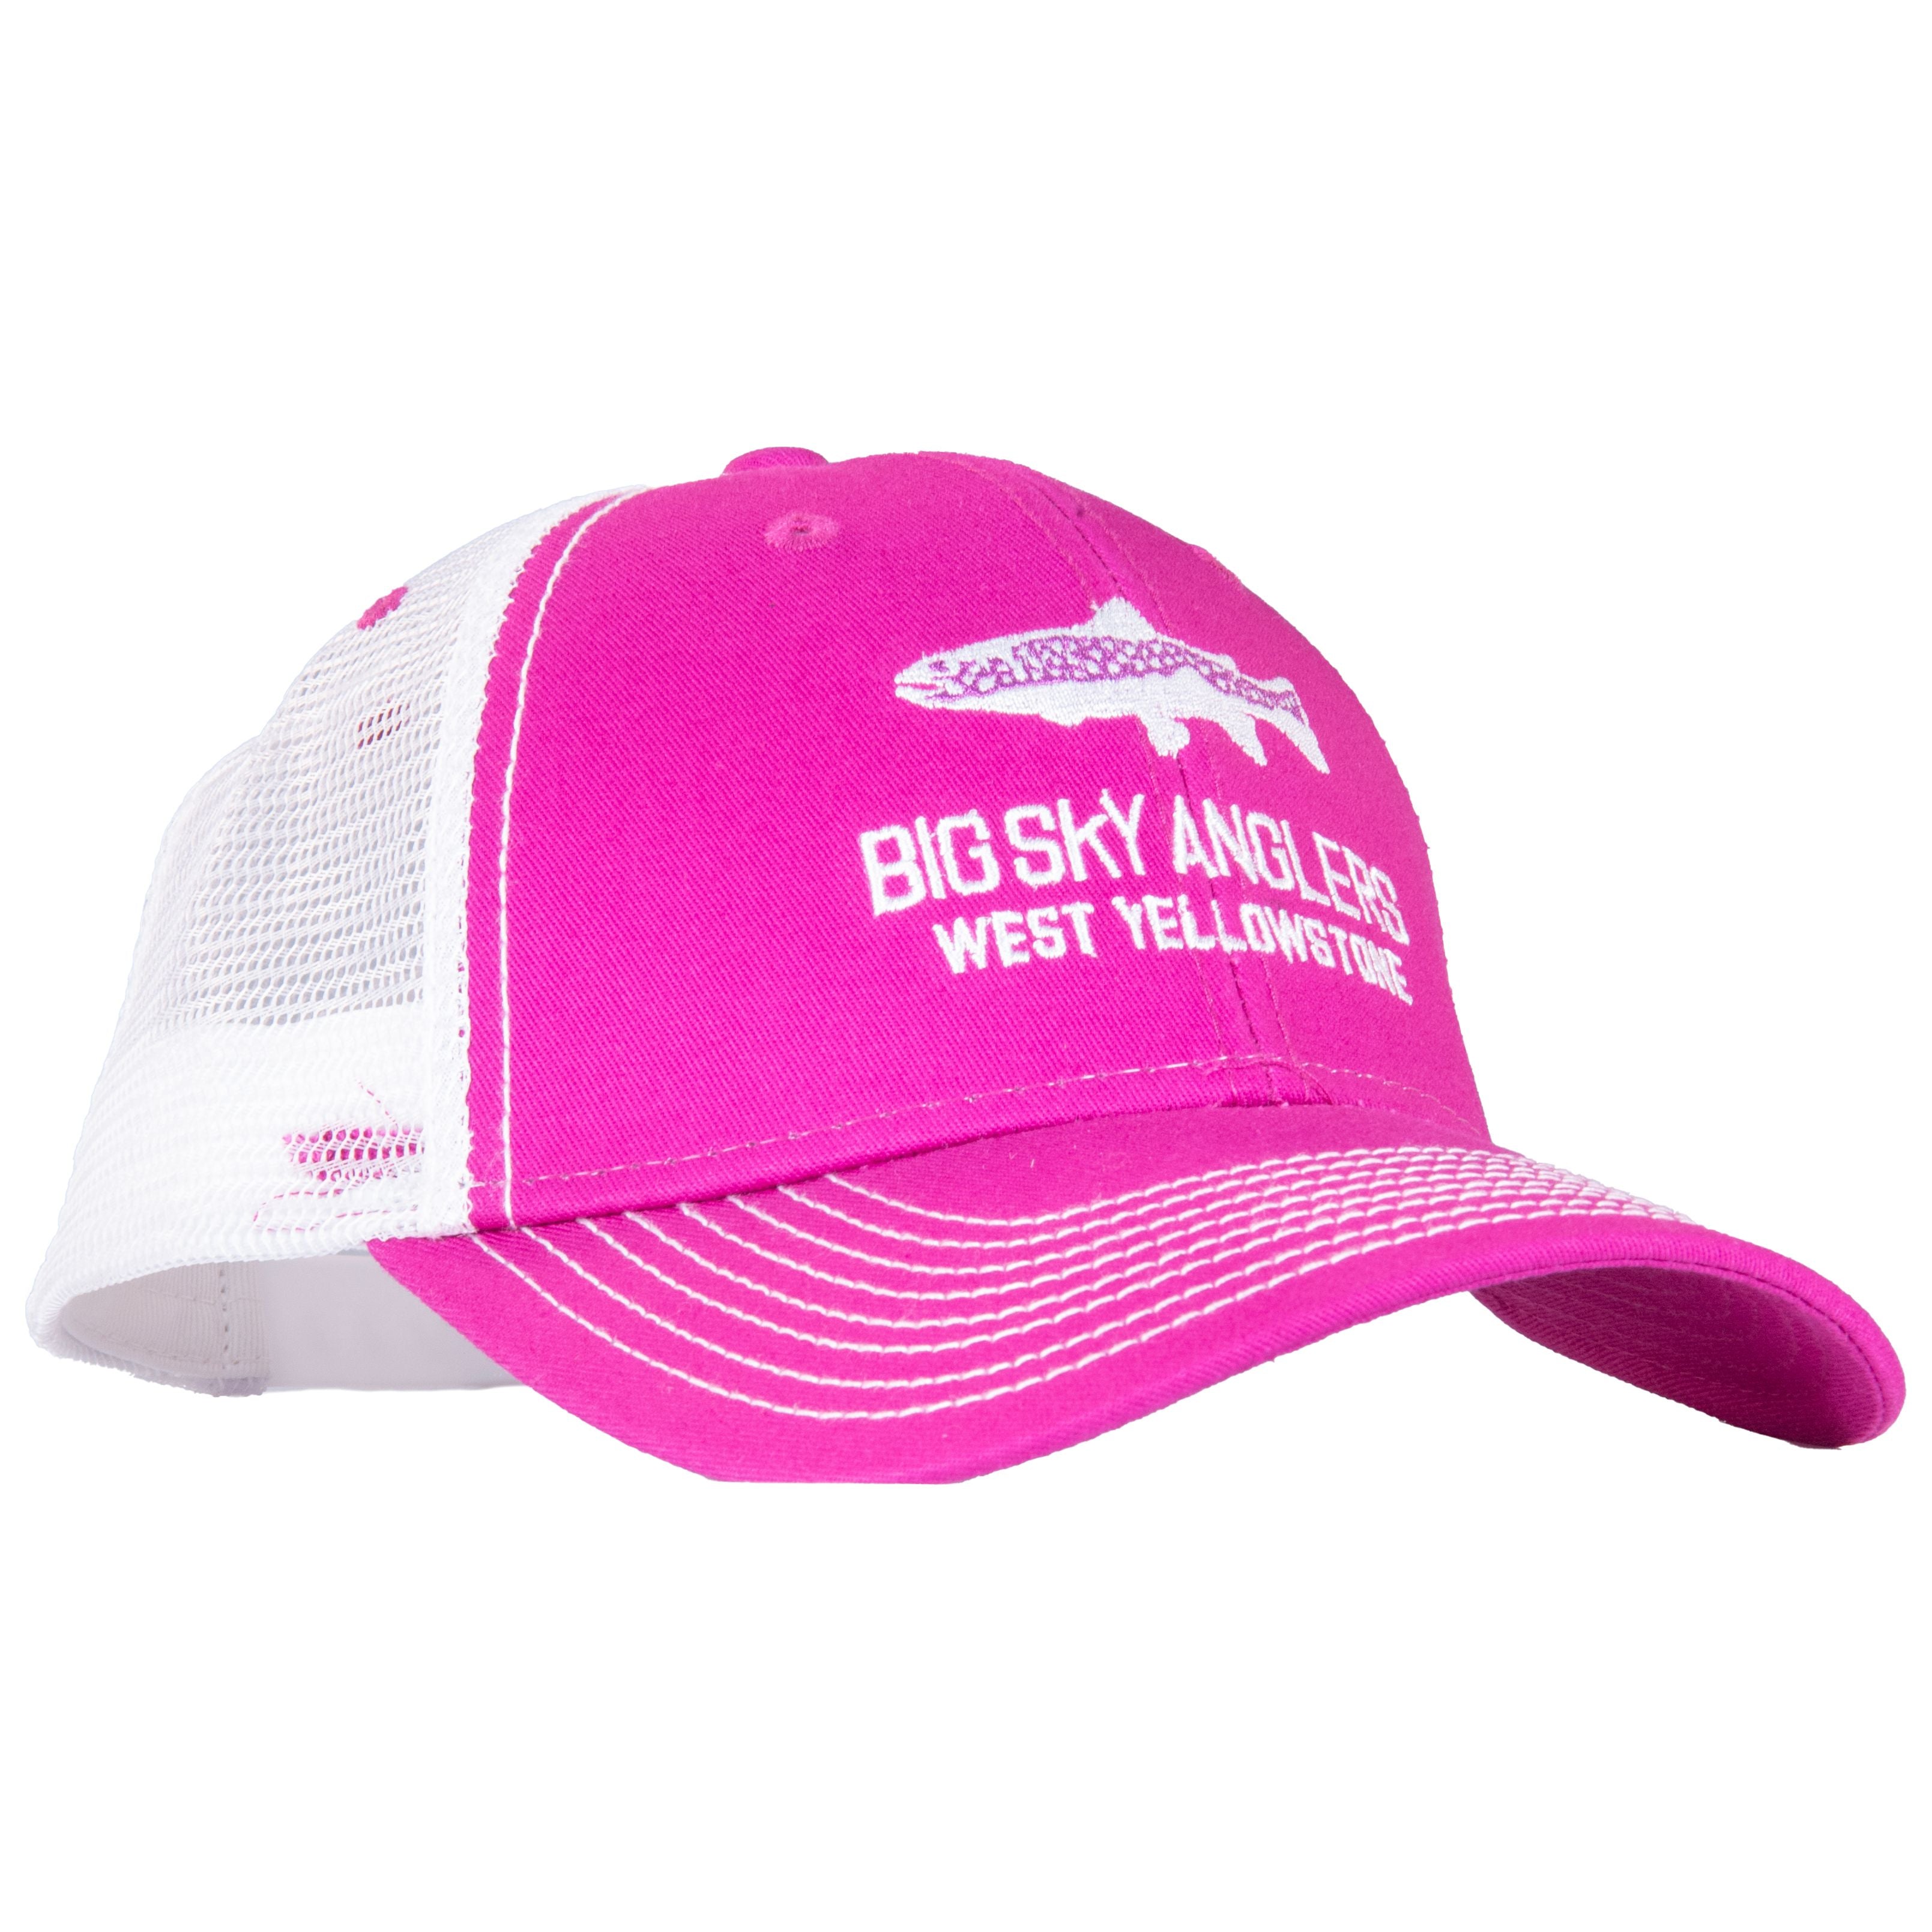 Big Sky Anglers Mountain Trout Logo Sideline Cap - Orchid Flower/White Default Title Image 01